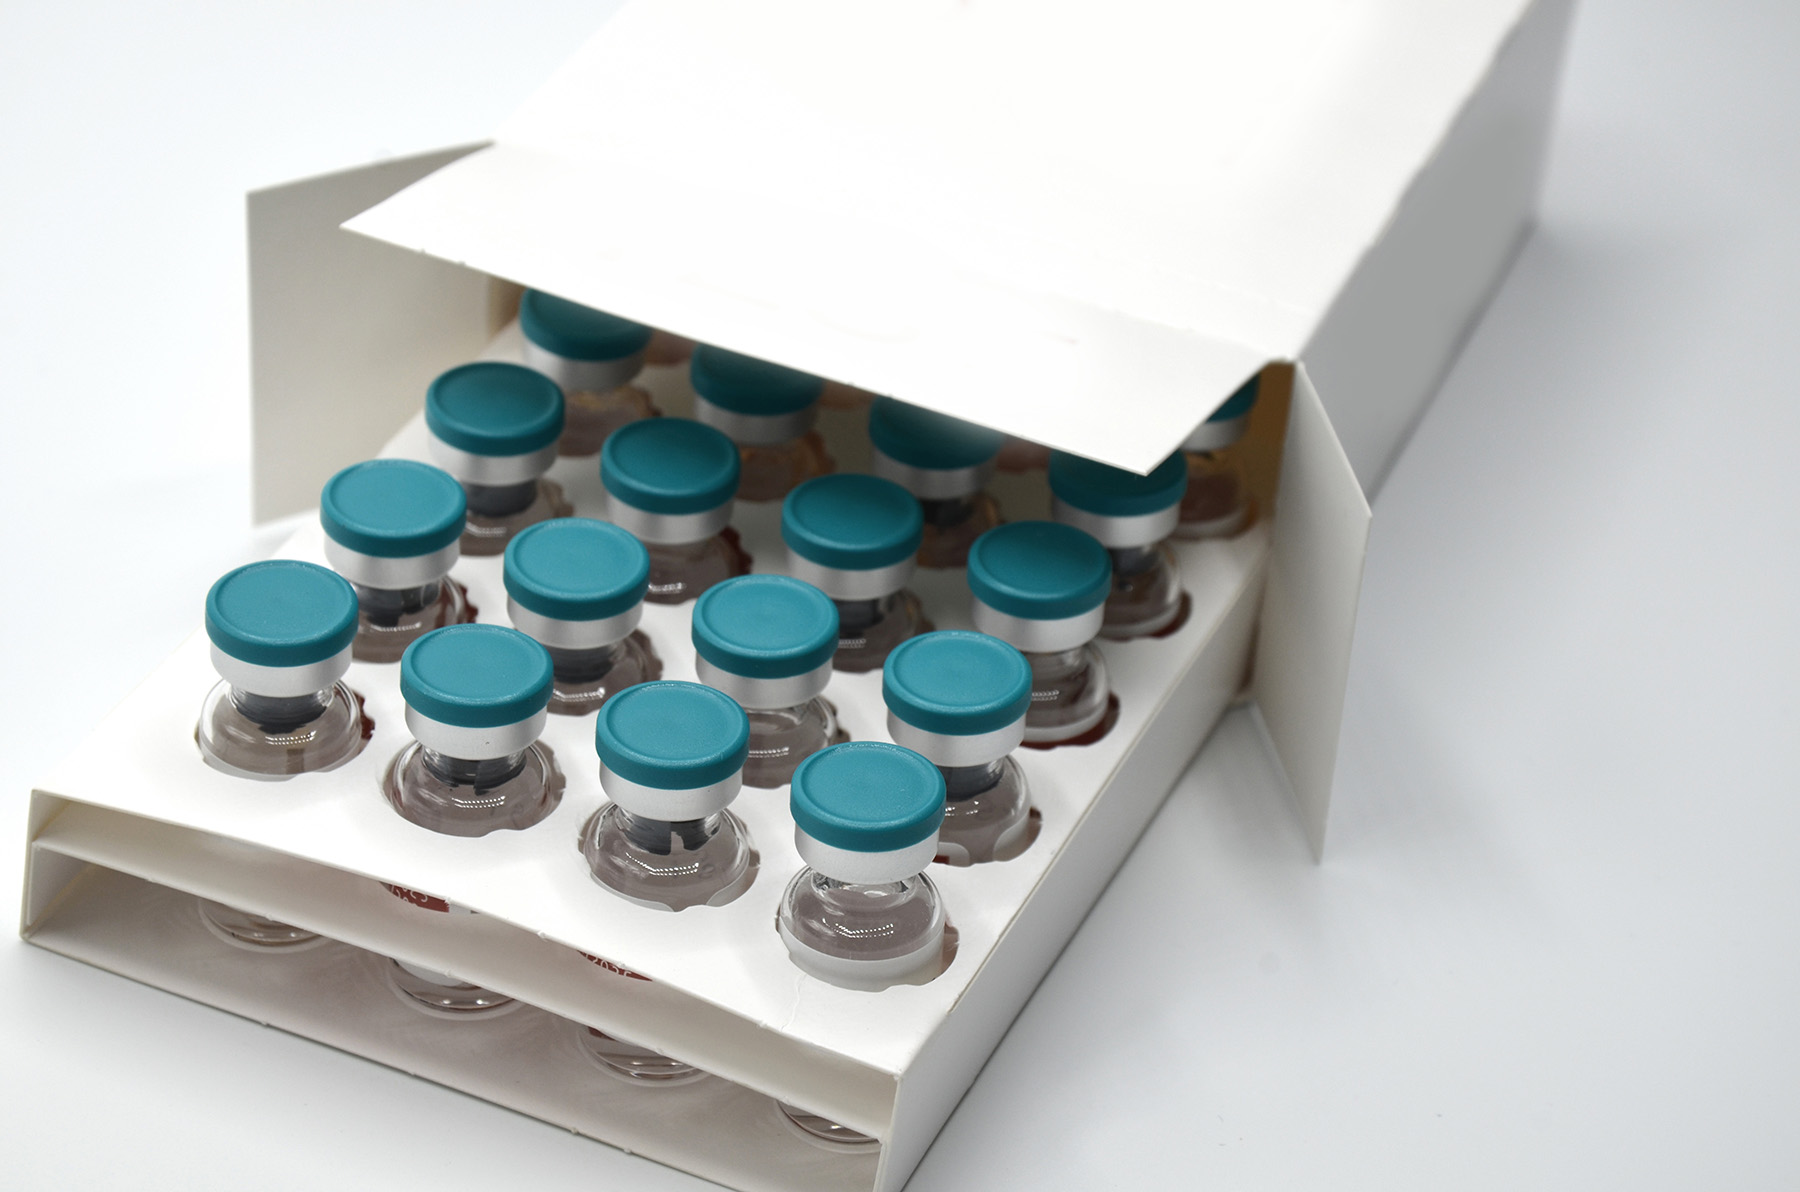 Vials in an Eco Save Pack cardboard box.